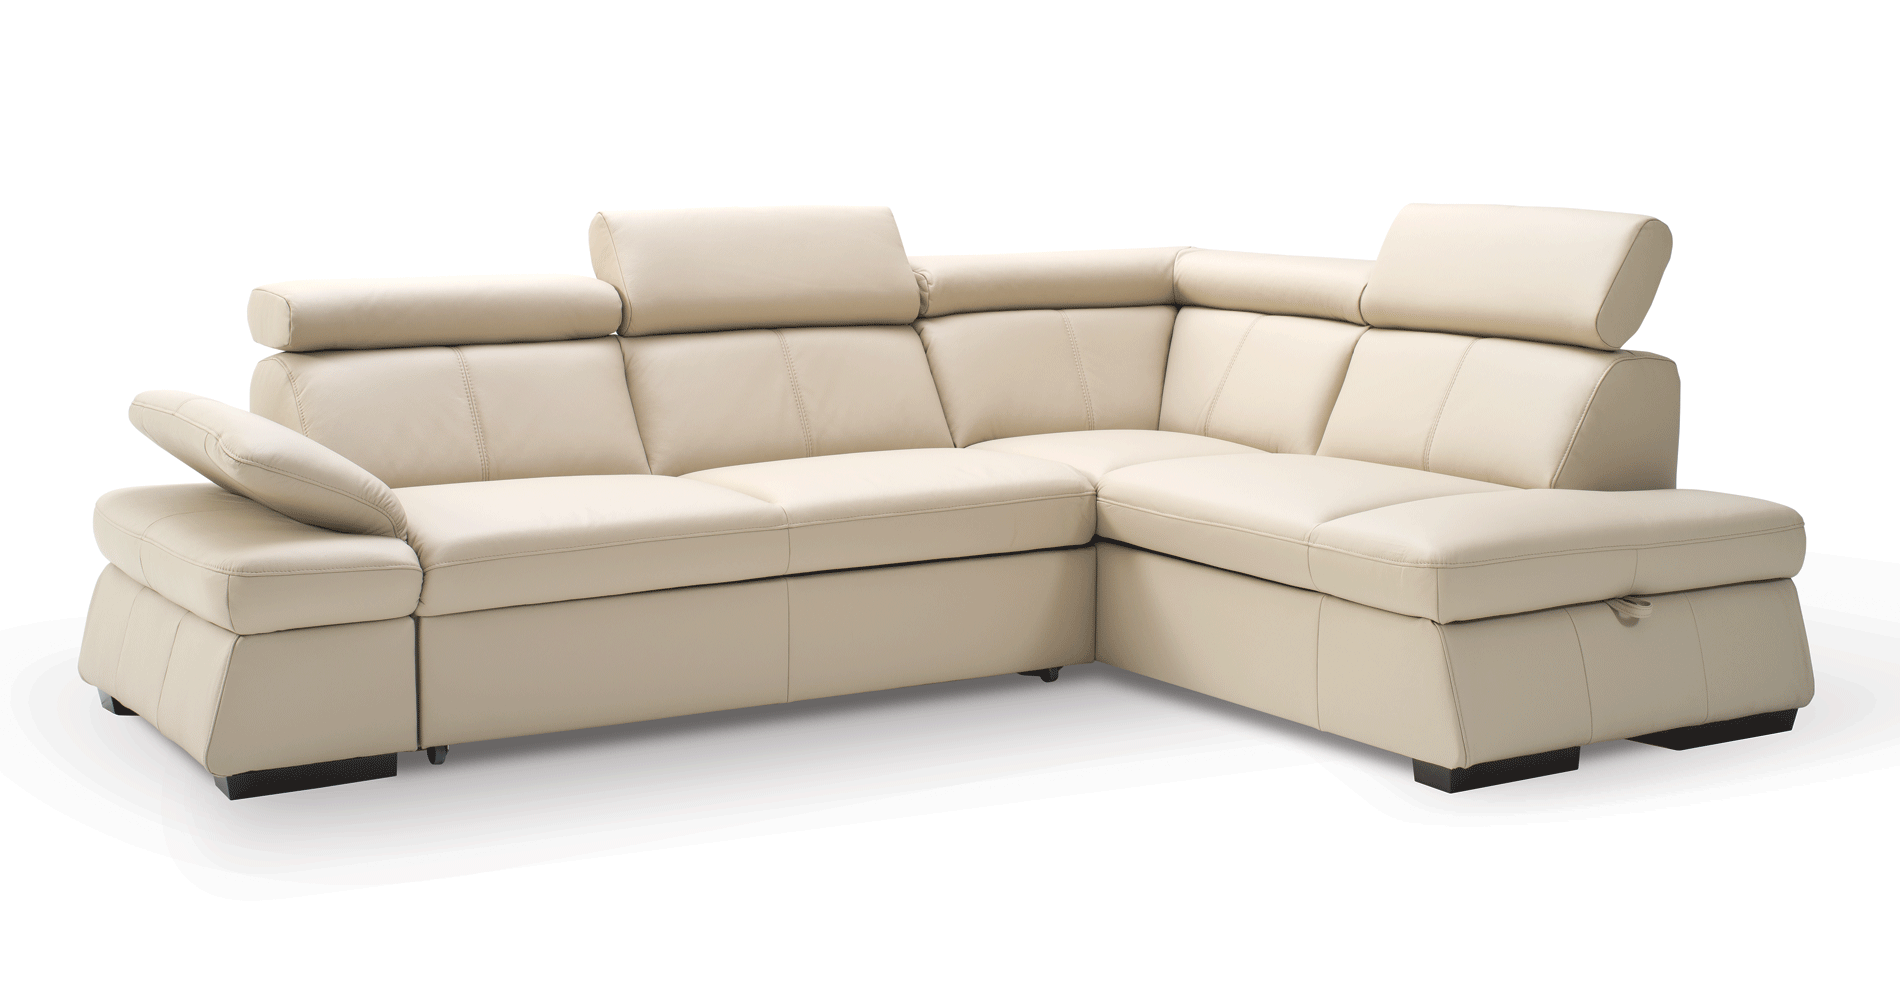 Living Room Furniture Sleepers Sofas Loveseats and Chairs Malpensa Sectional w/ Bed & storage